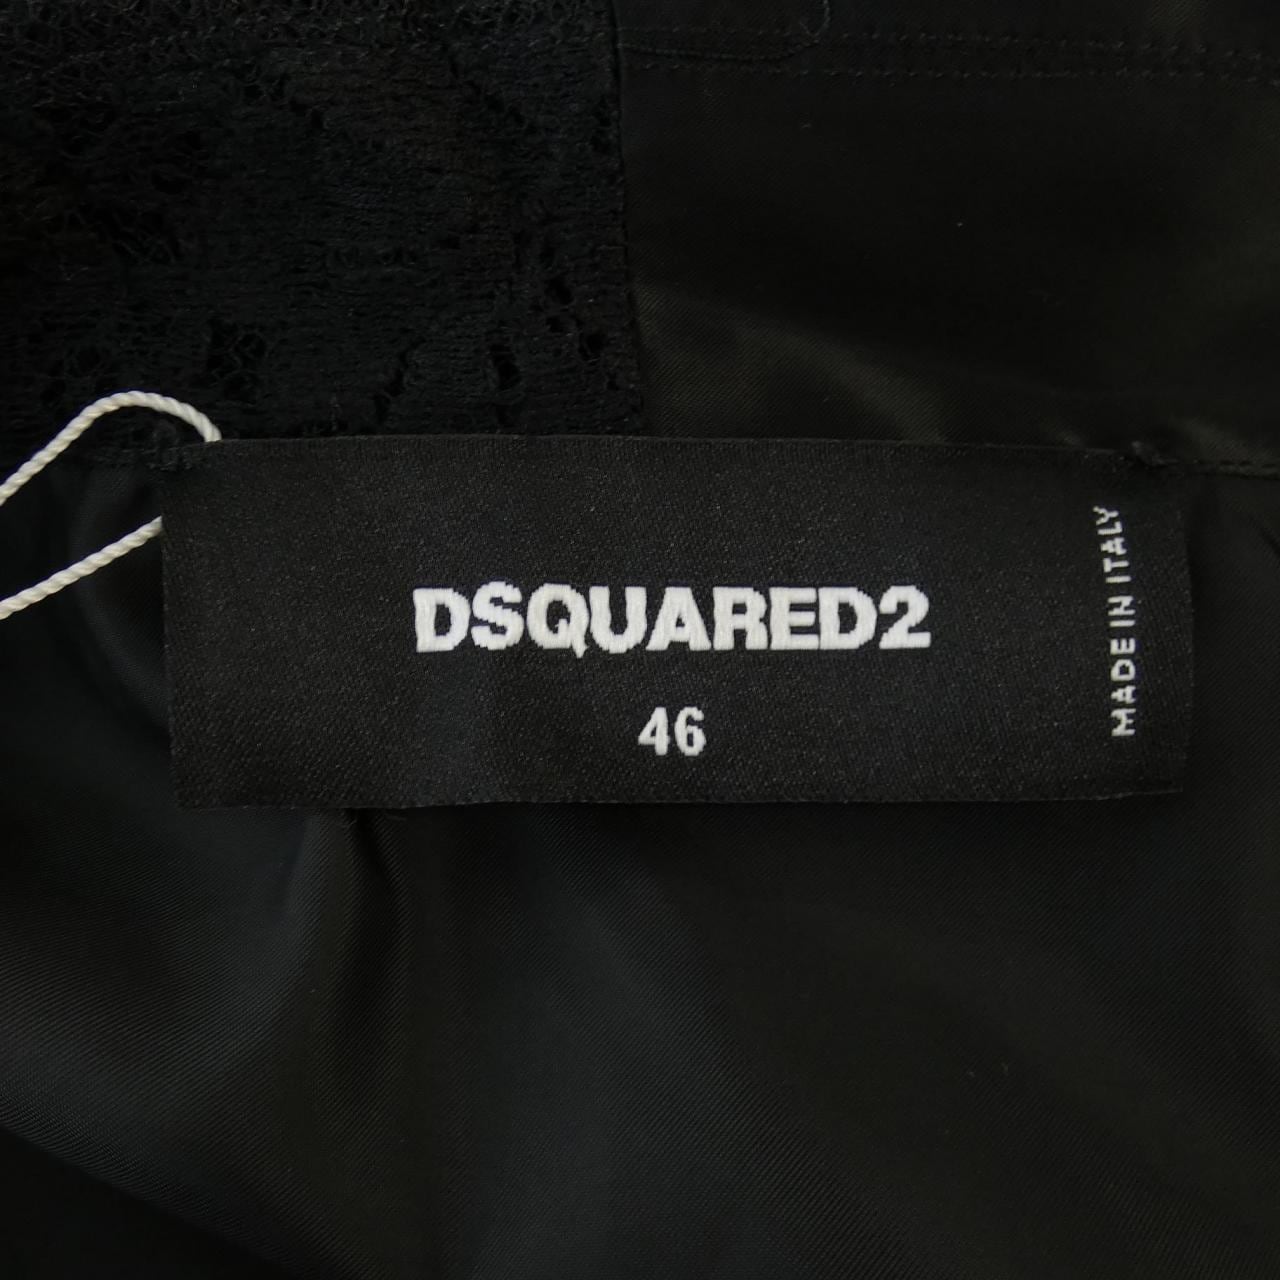 DSQUARED2 S/S shirt